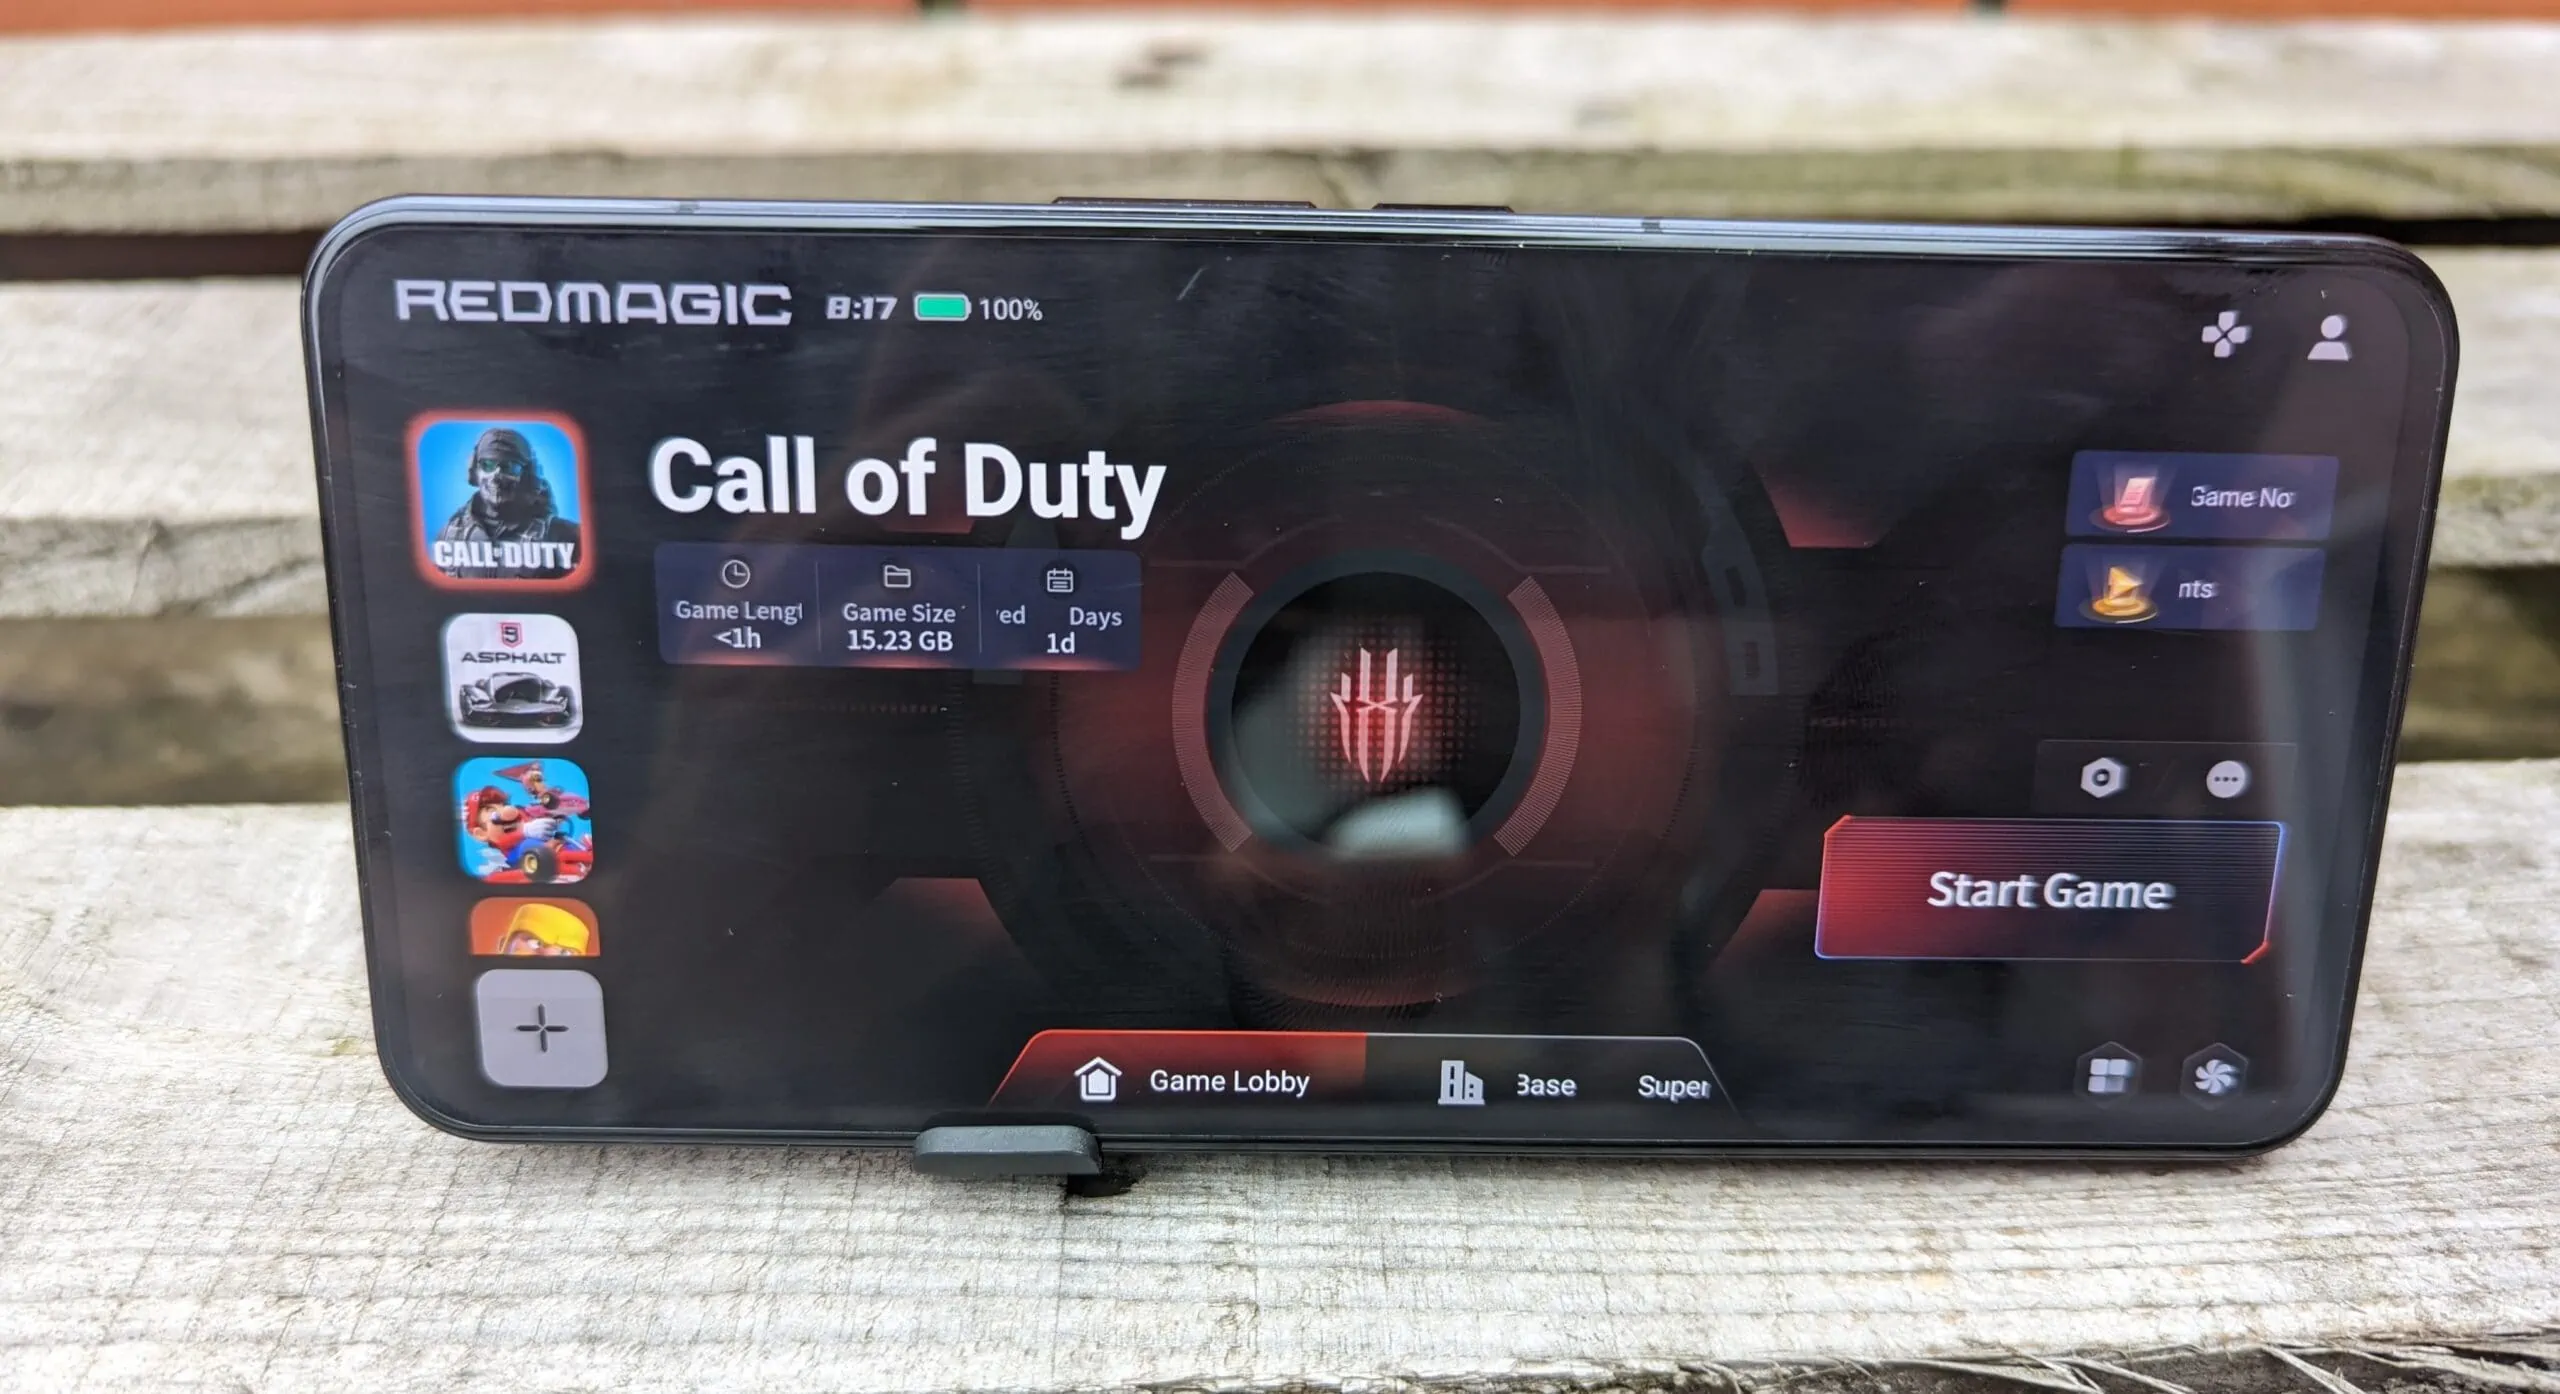 Five phone settings that you can optimise for games